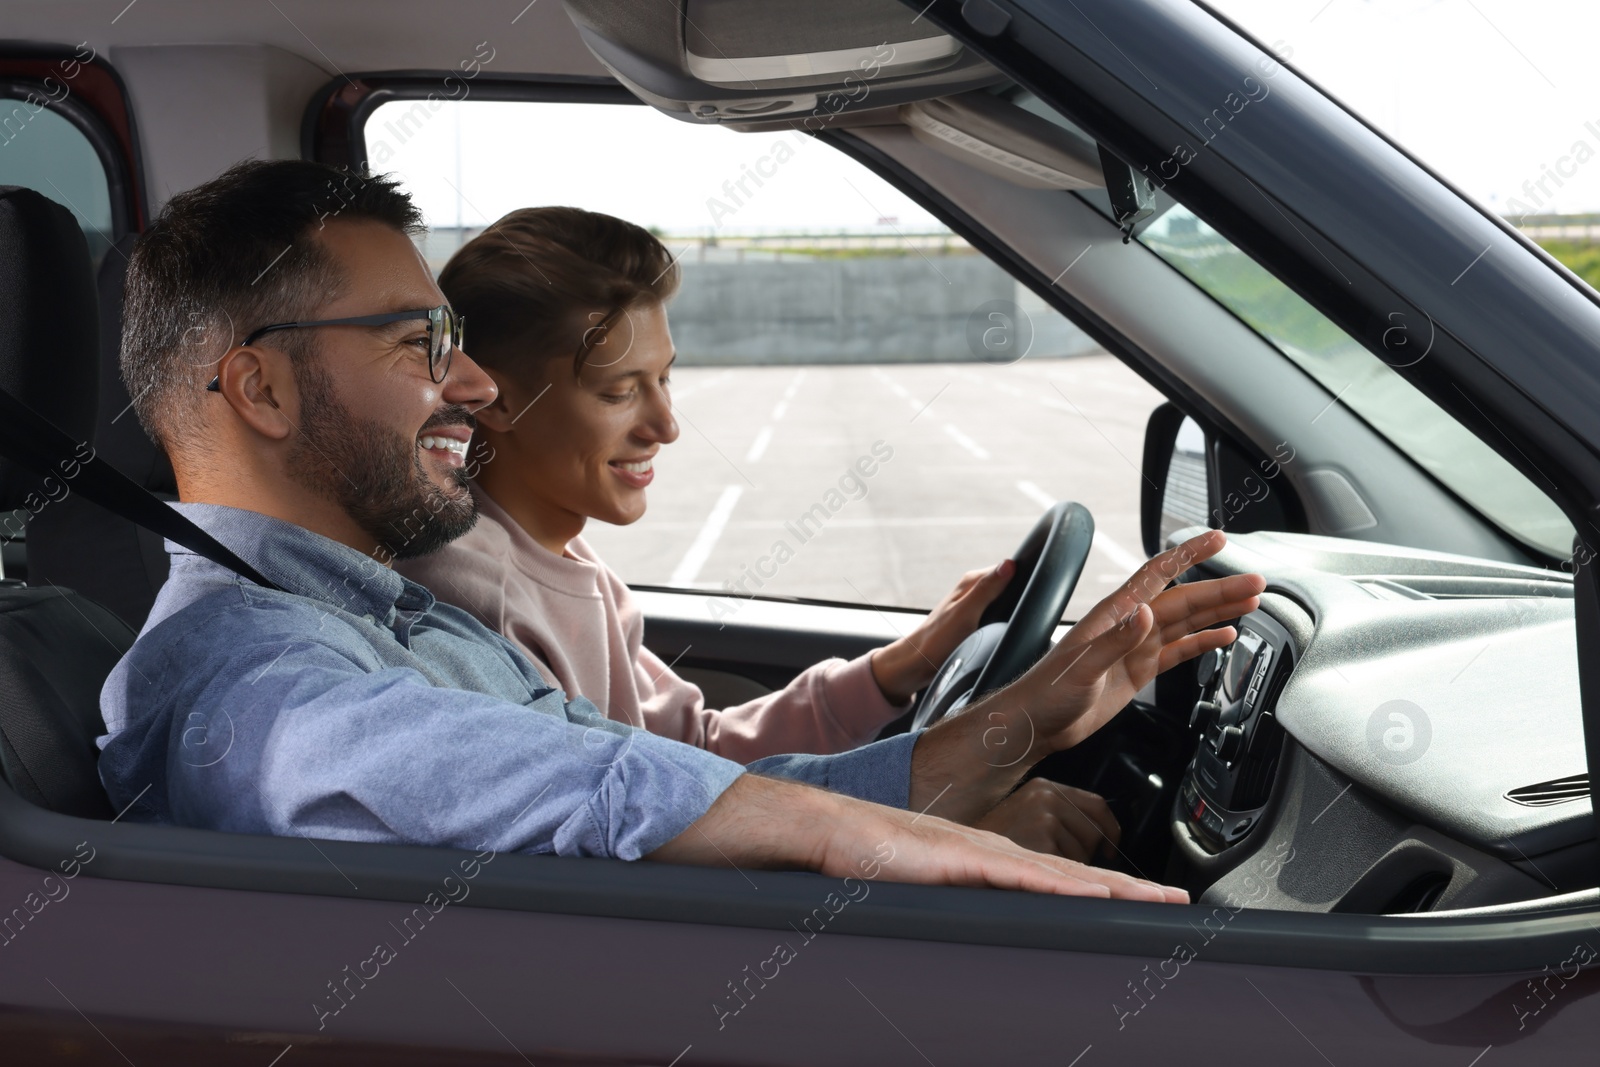 Photo of Driving school. Happy student during lesson with driving instructor in car at parking lot